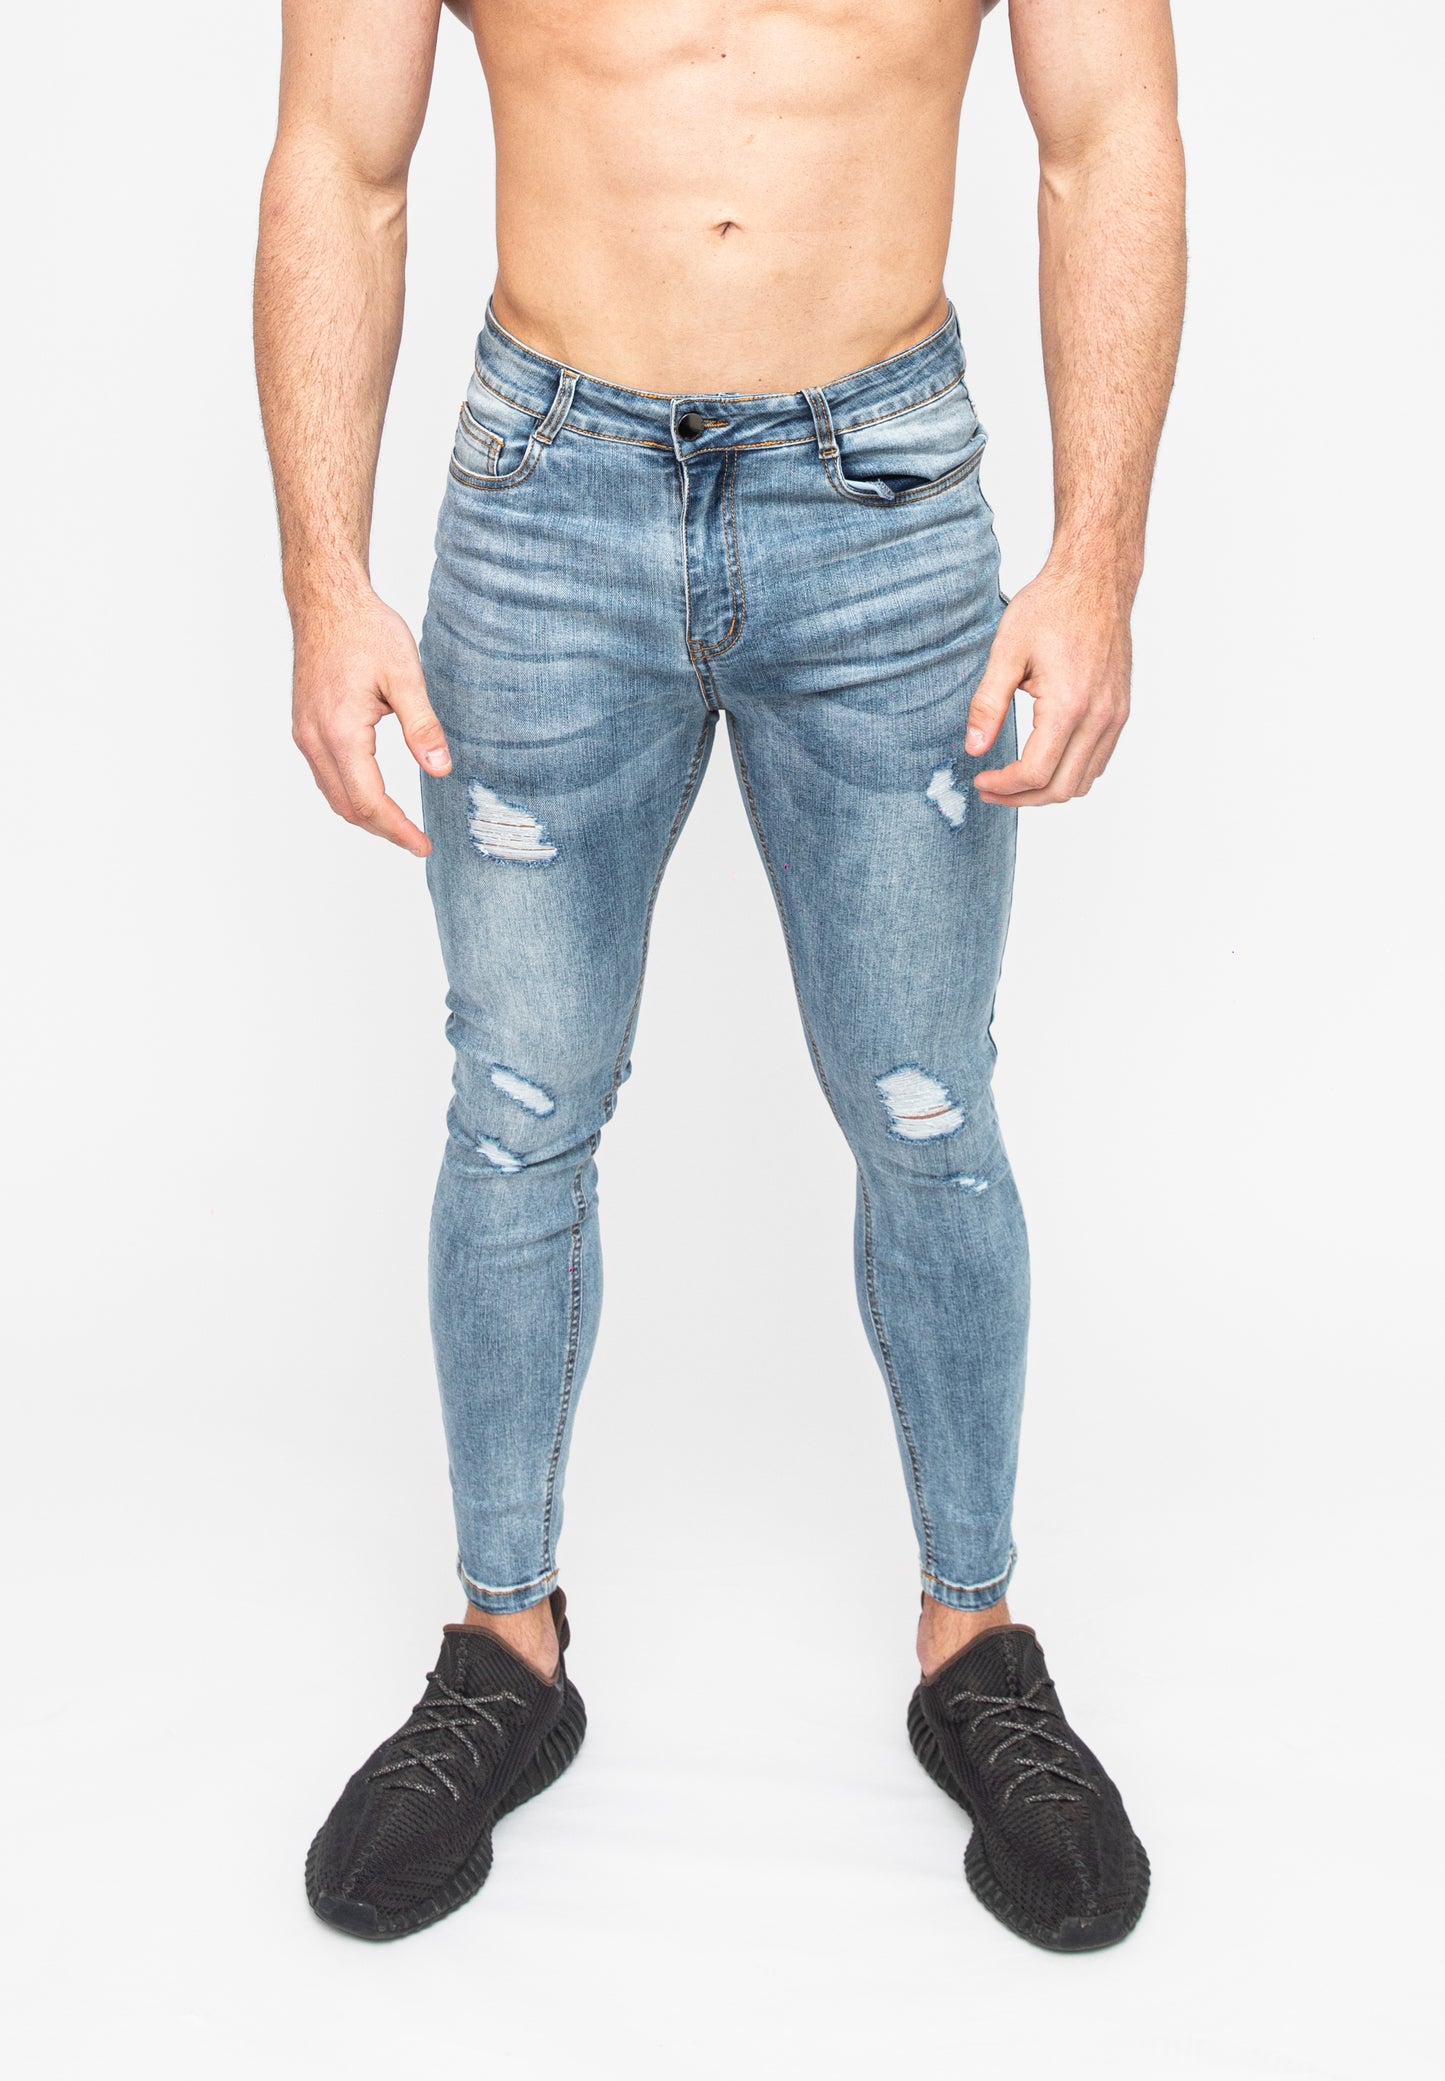 Blue Ripped Skinny Men's Jeans Front